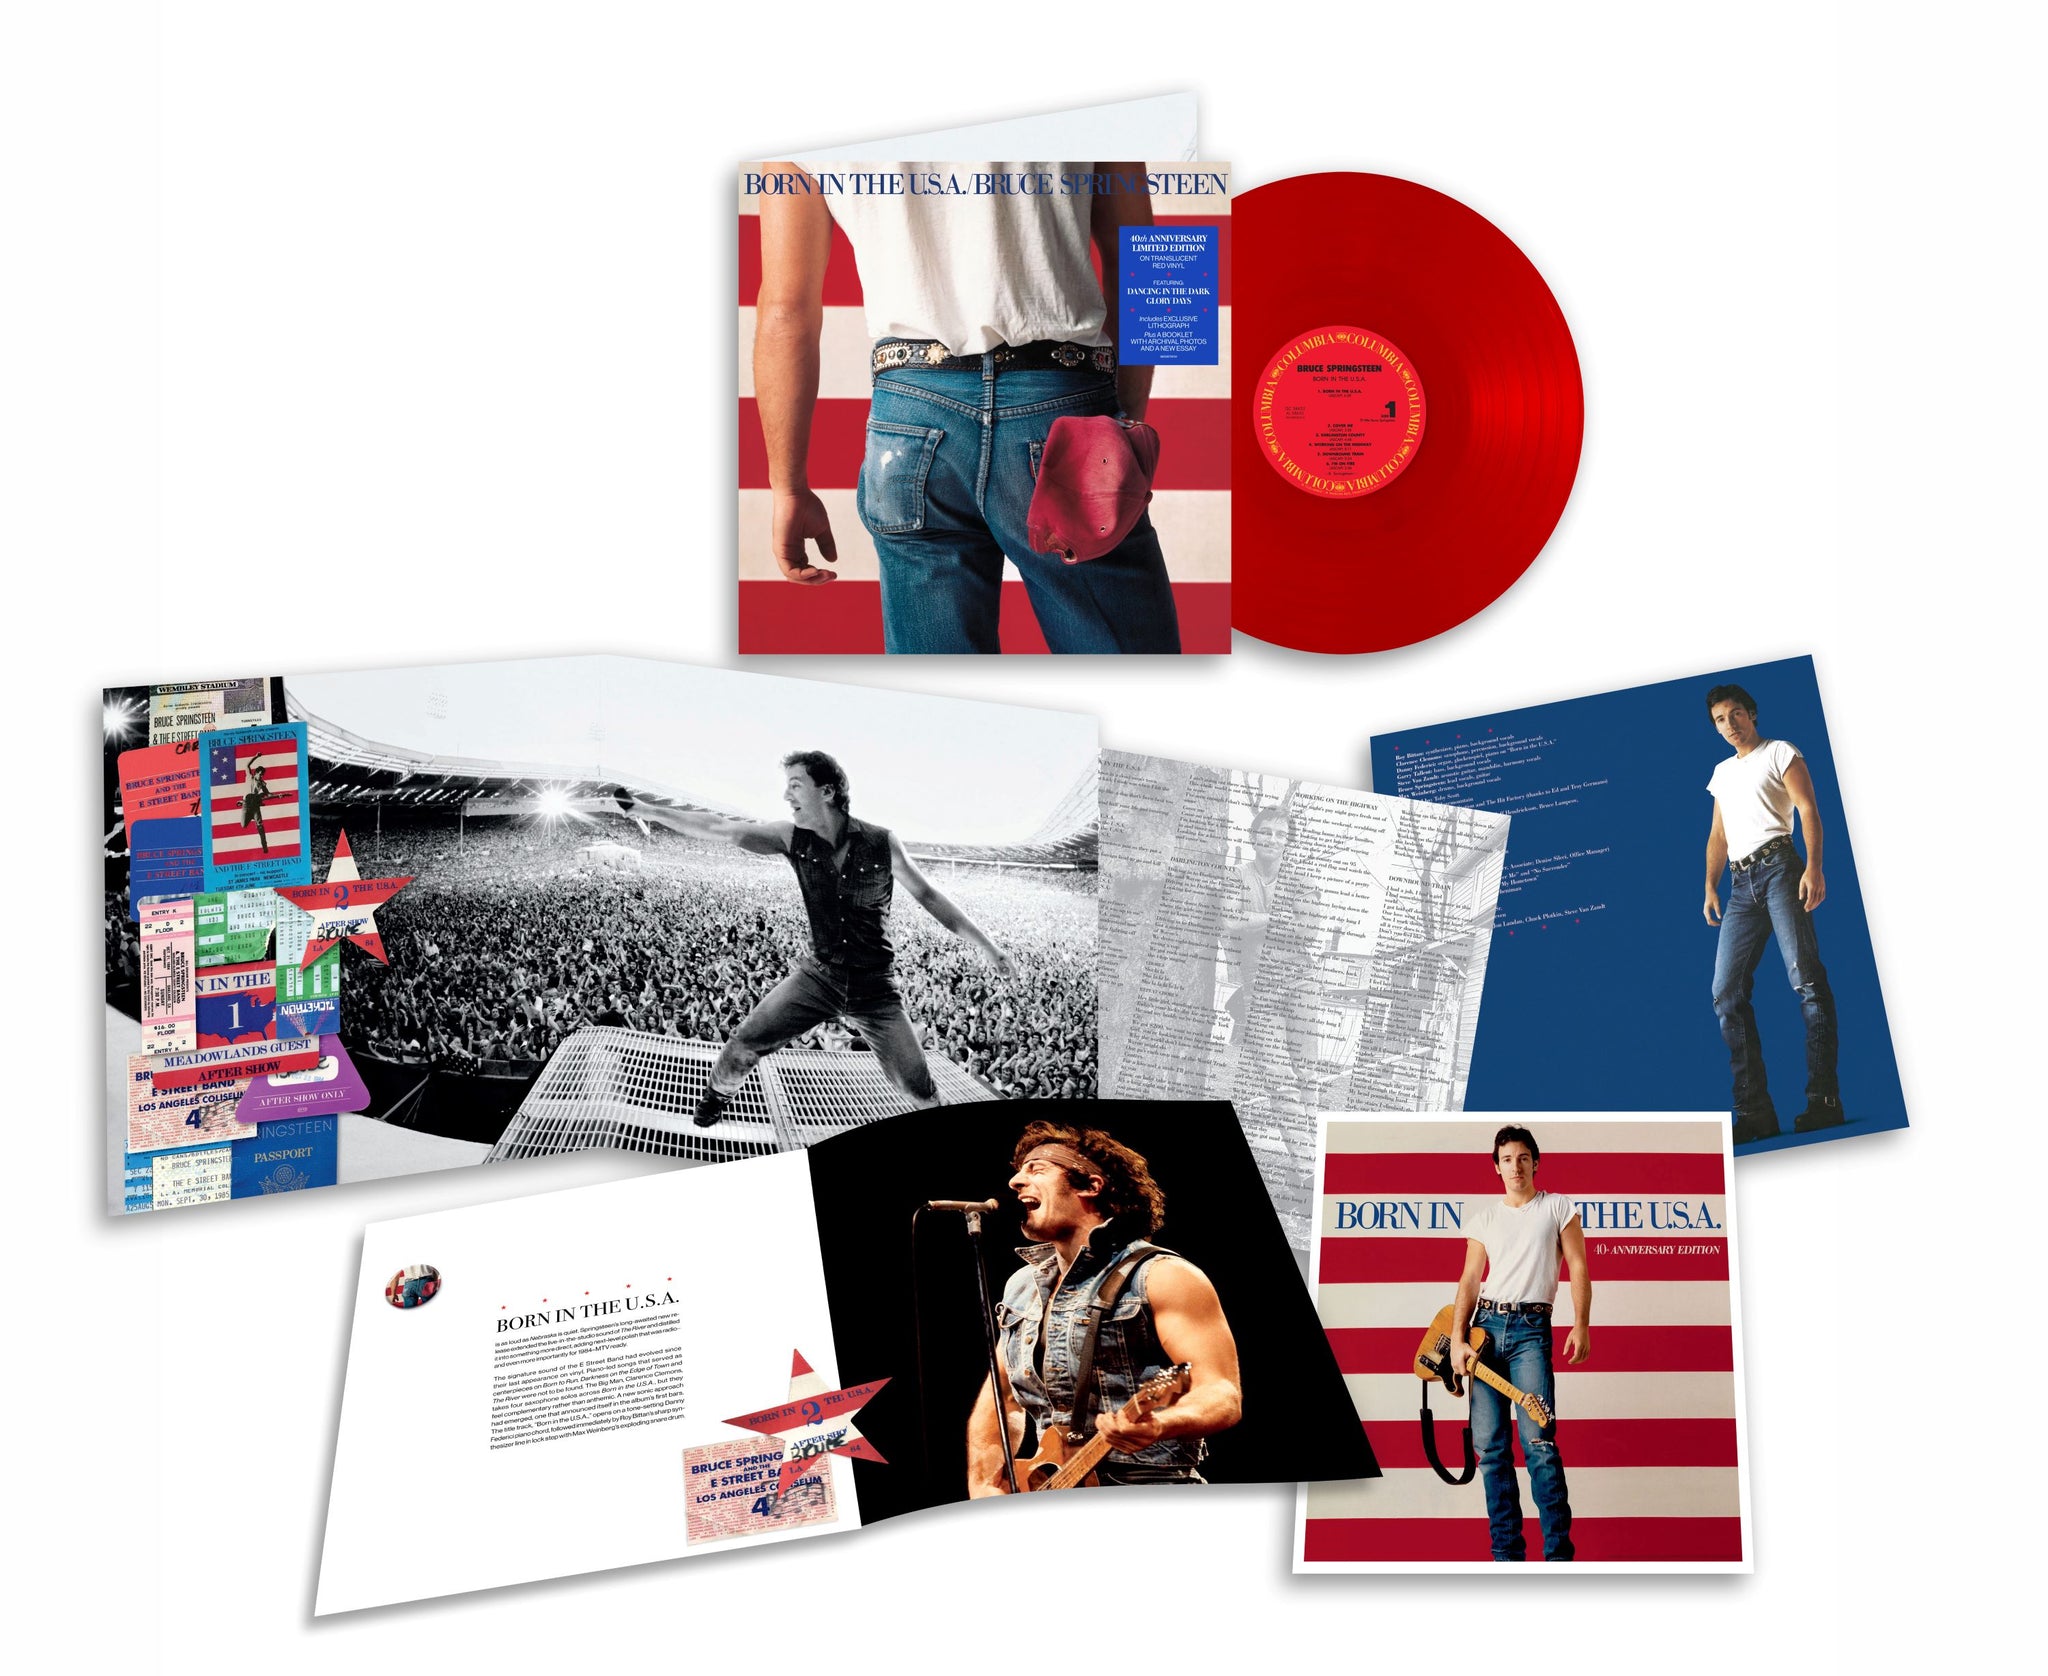 Bruce Springsteen "Born In The U.S.A." 40th Anniversary Translucent Red Vinyl - PRE-ORDER